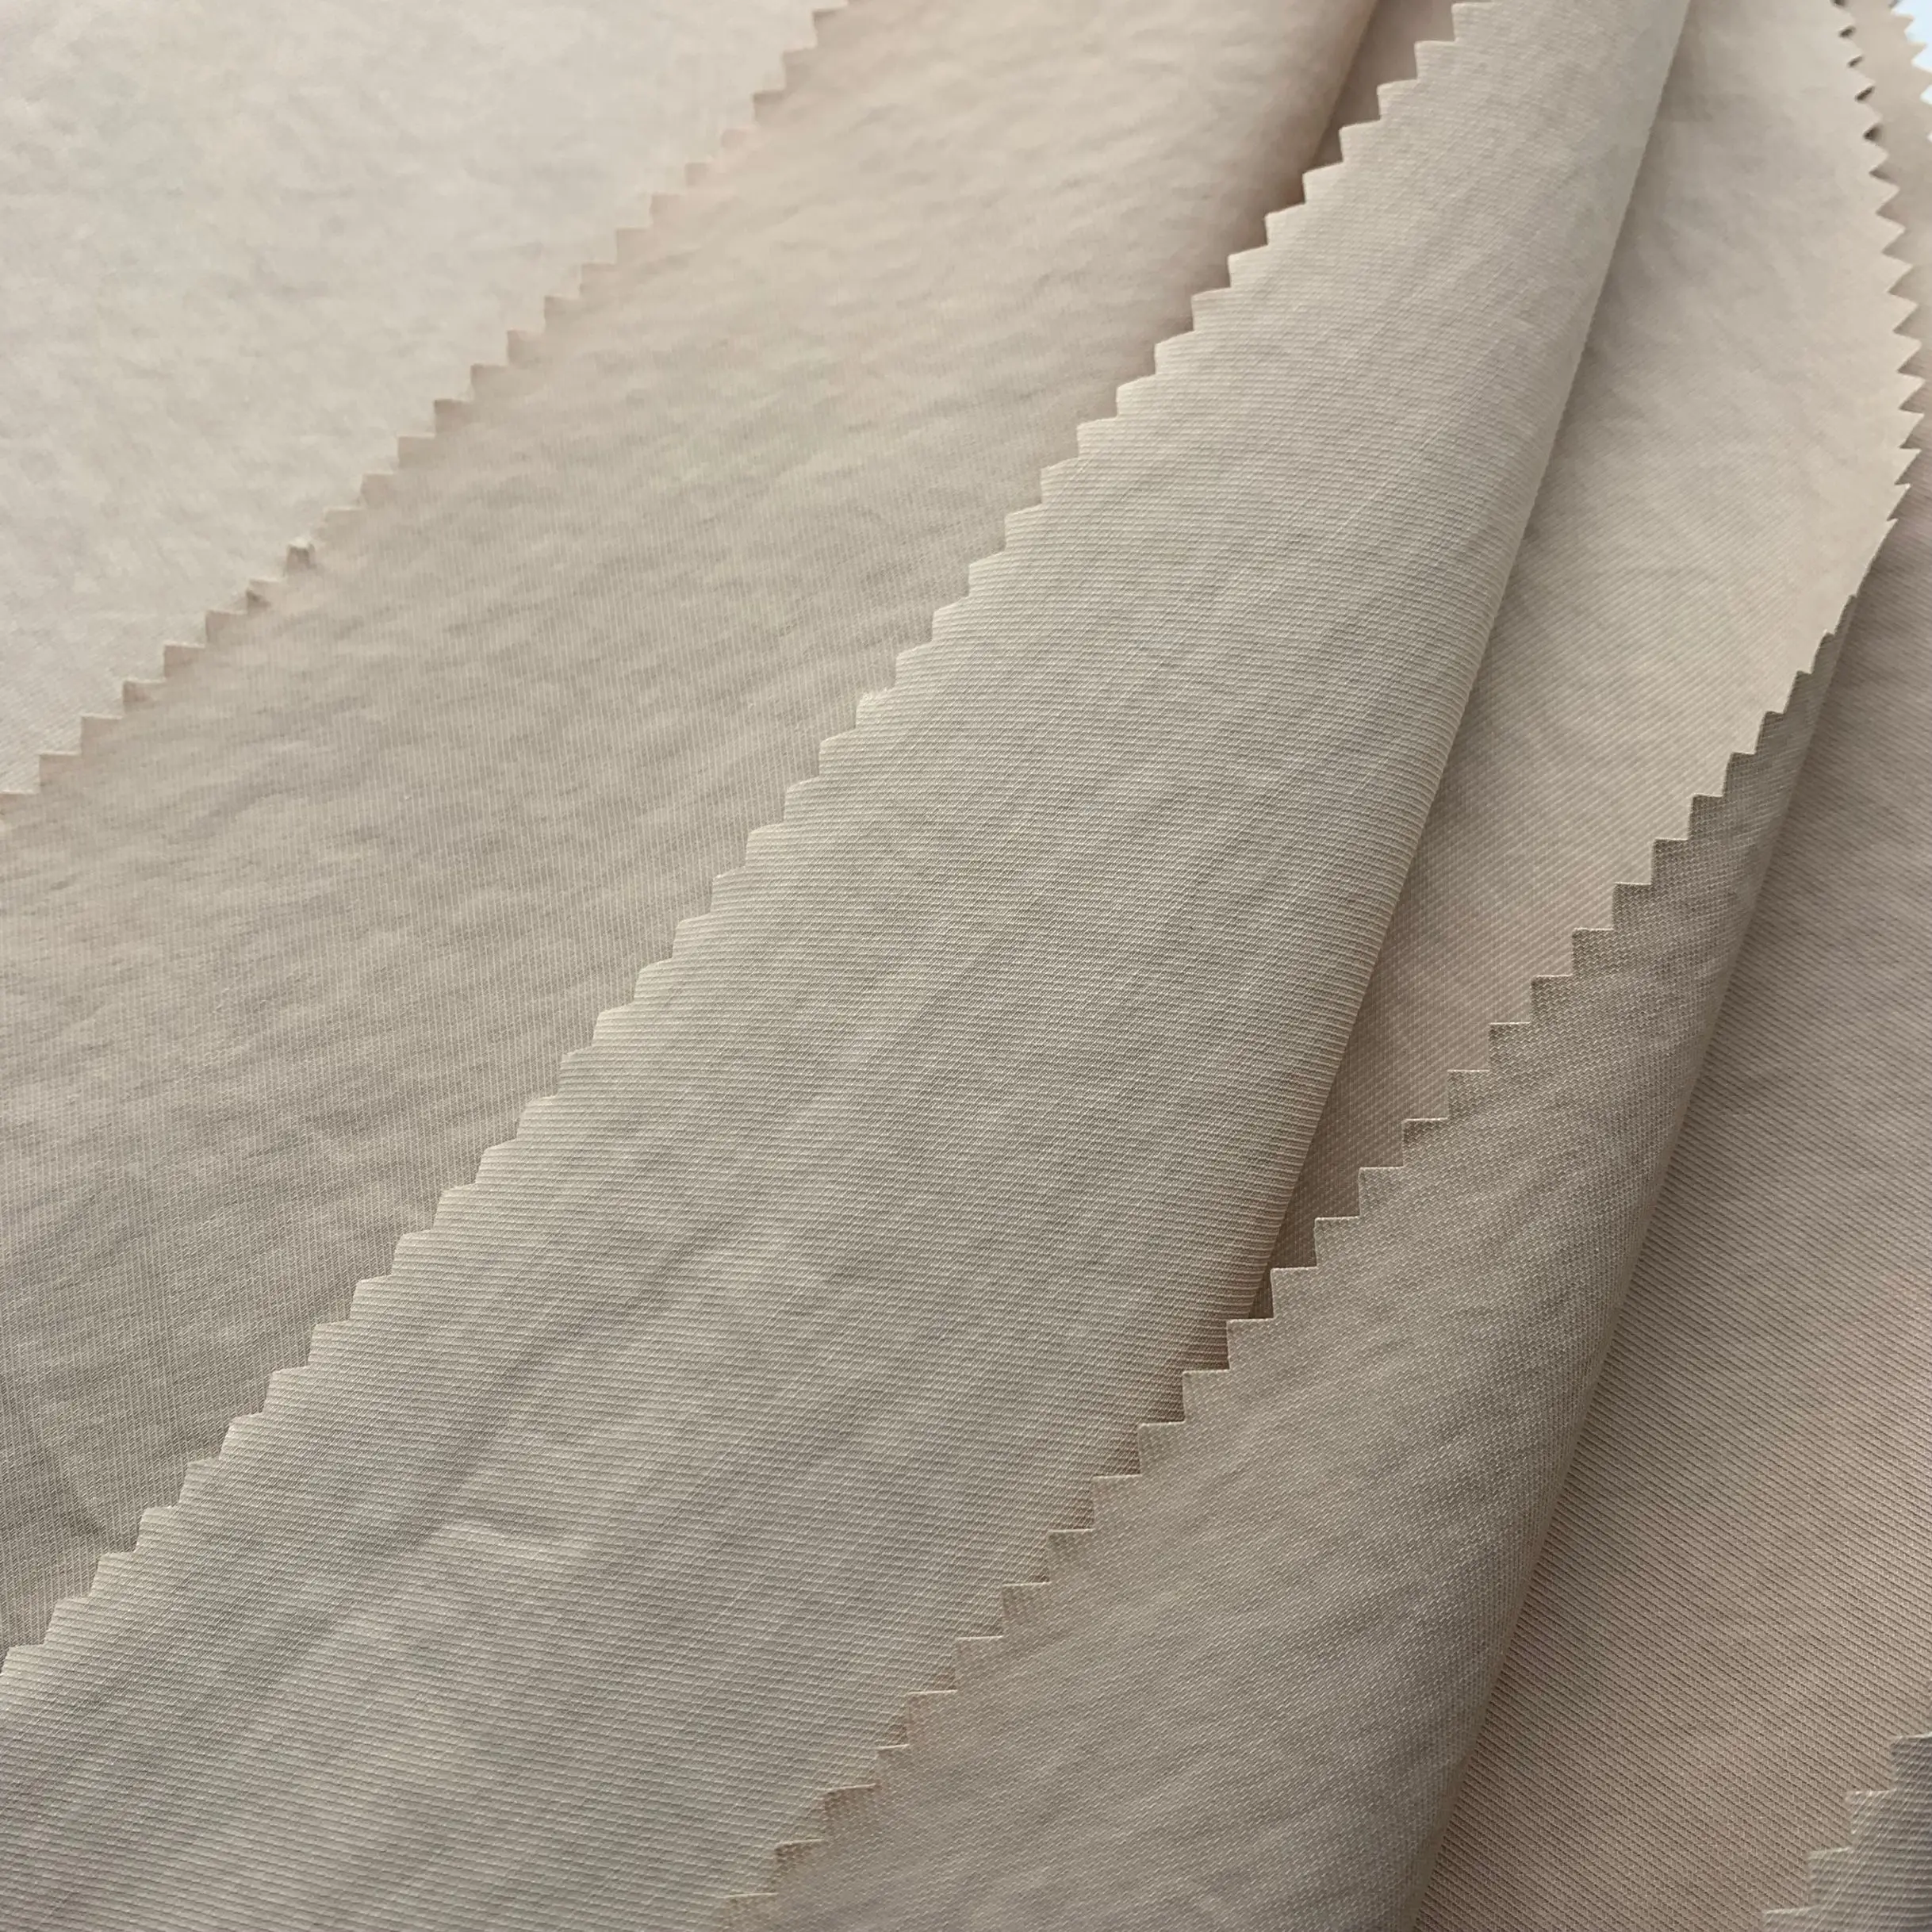 2022 New design Good quality Factory Directly Windproof plain 40S Cavalry Twill Nylon cotton fabric for women